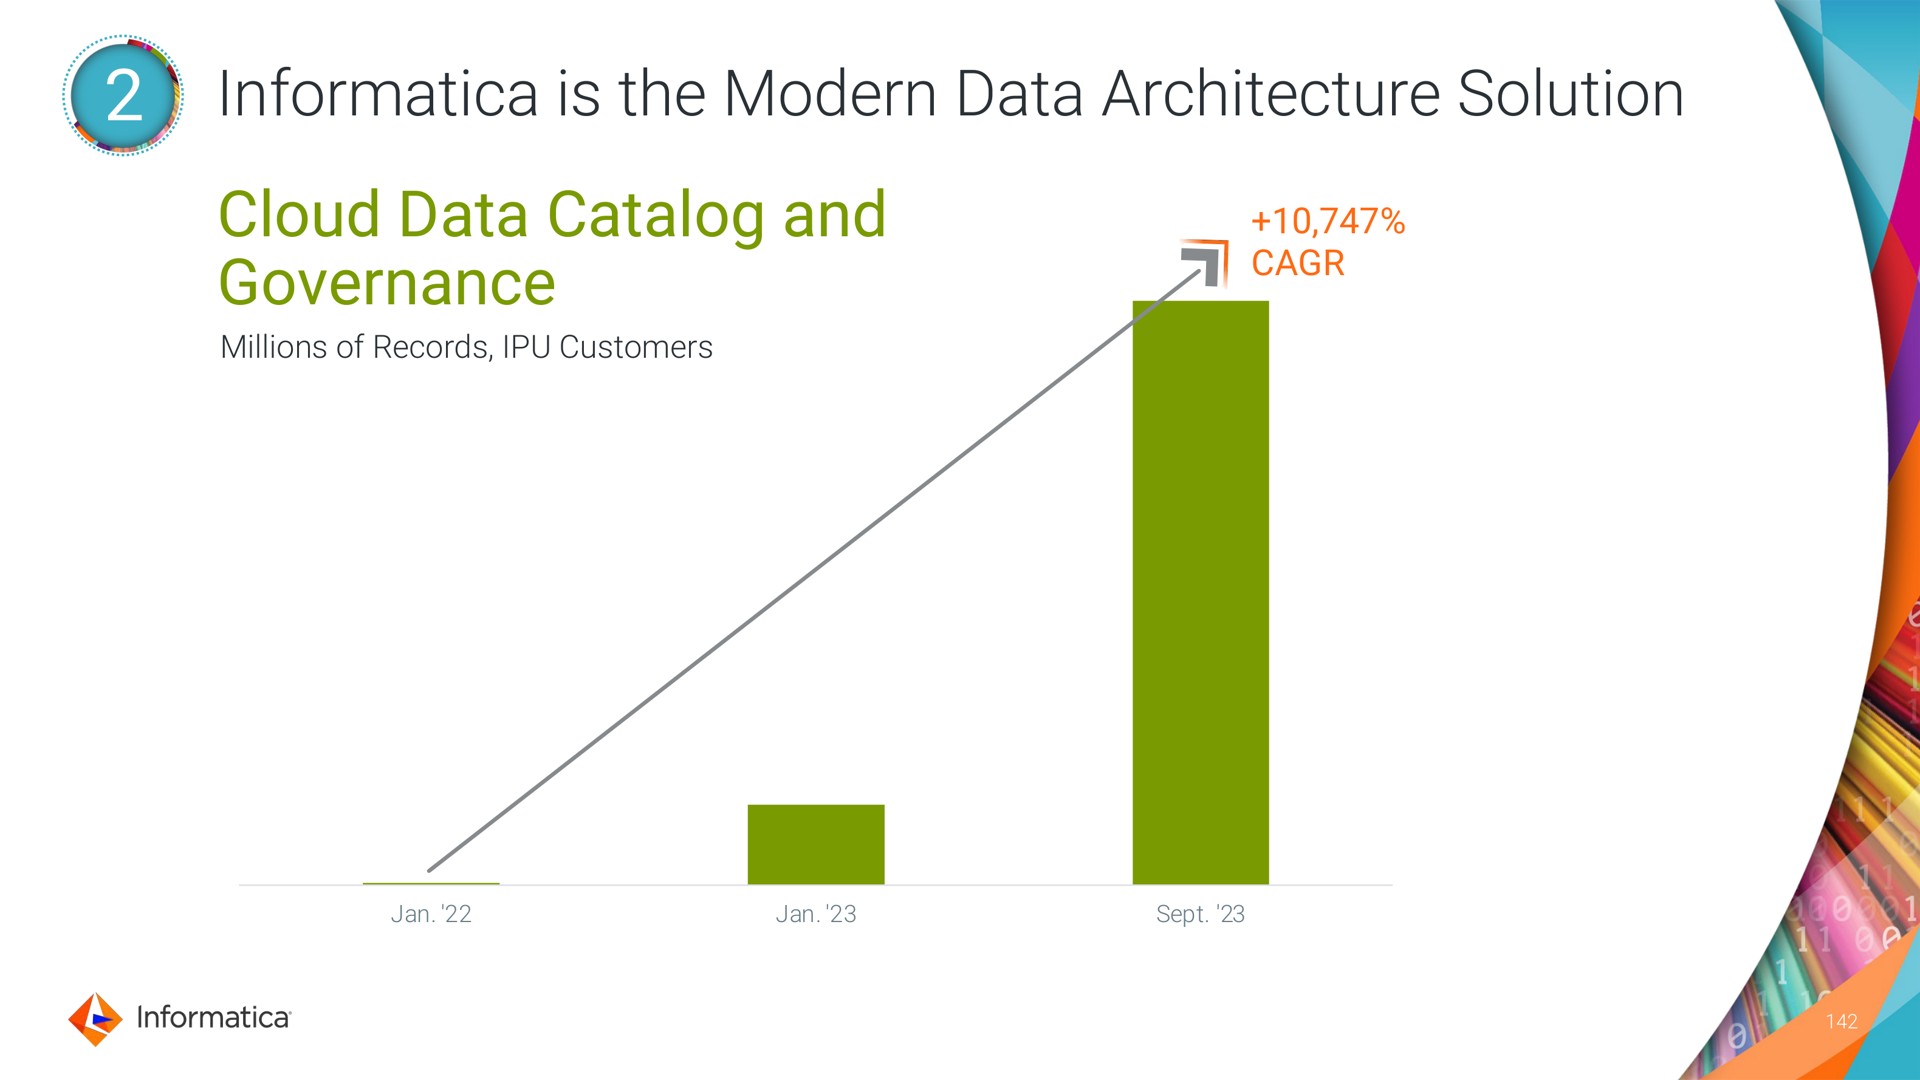 is the modern data architecture solution cloud data and governance | Informatica